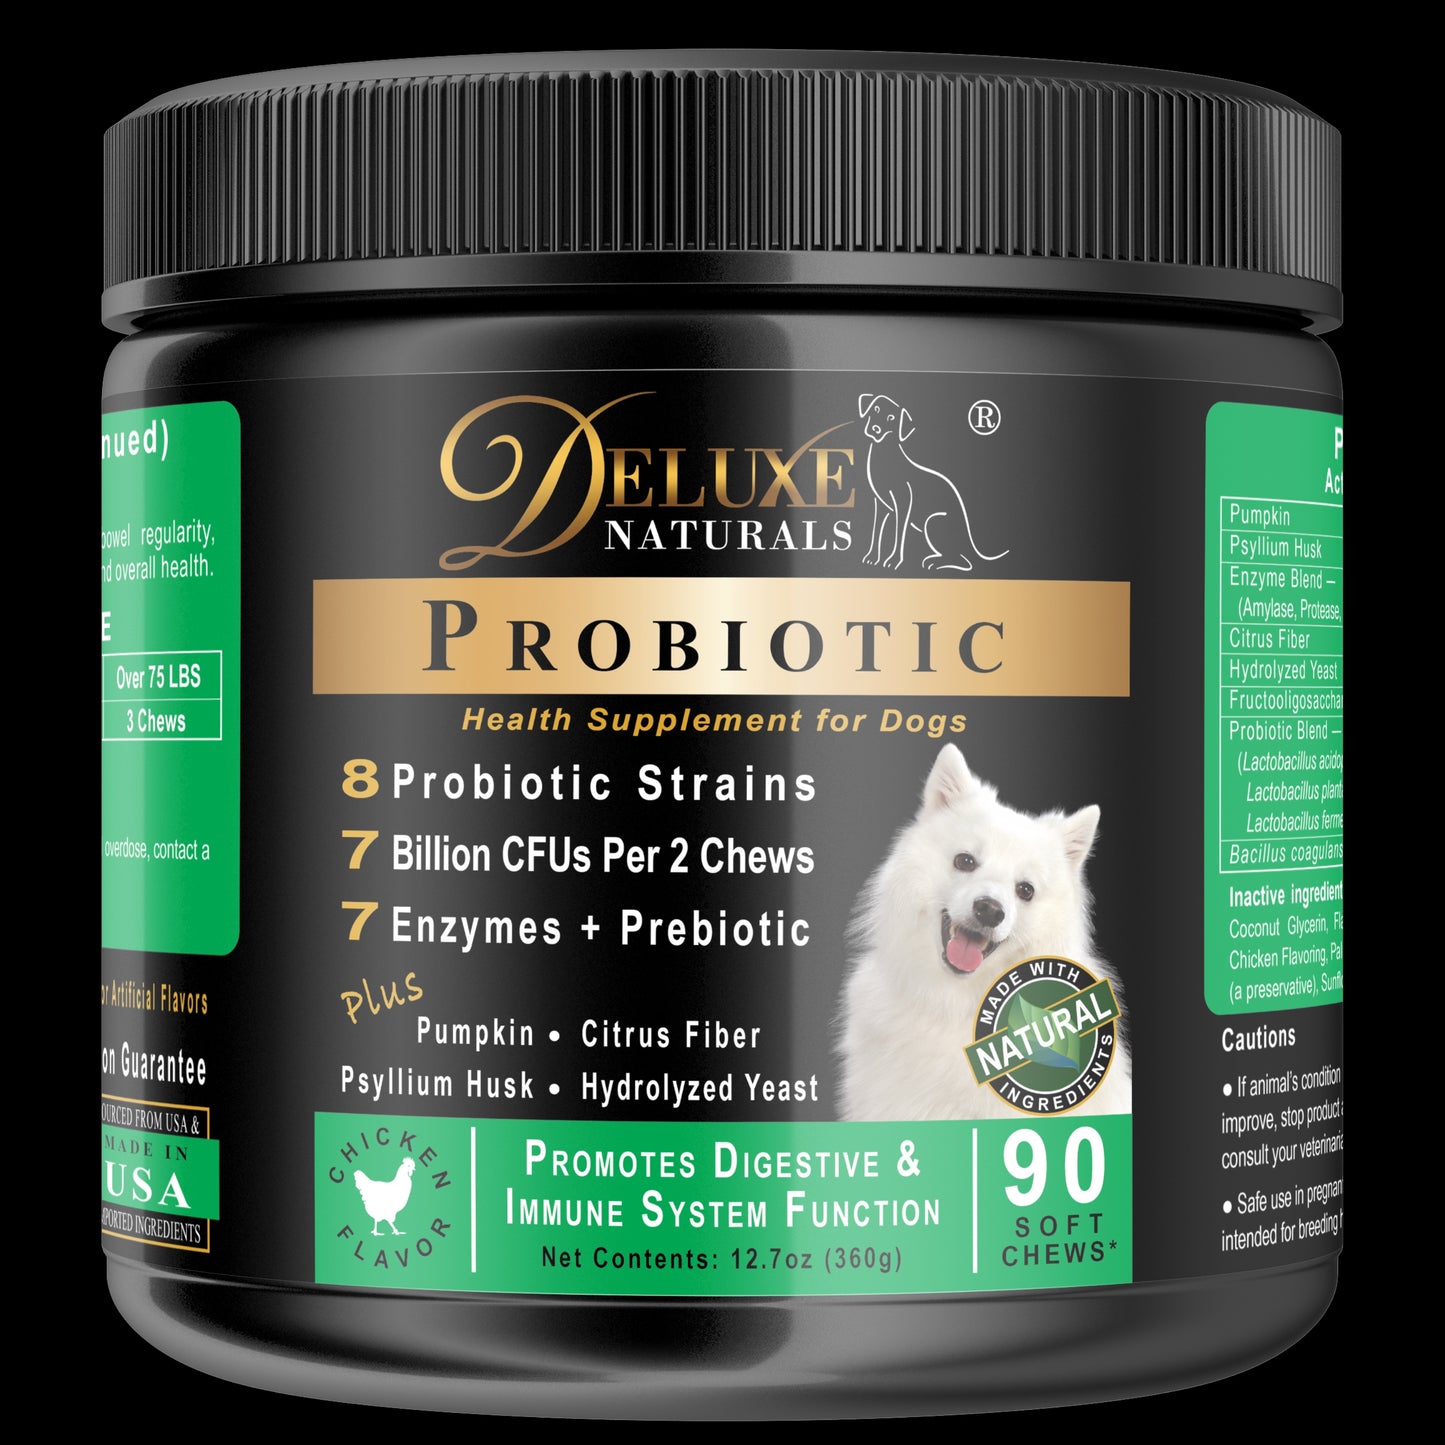 Deluxe Naturals Probiotic Soft Chews for Dogs - 90 Count (Pack of 1)